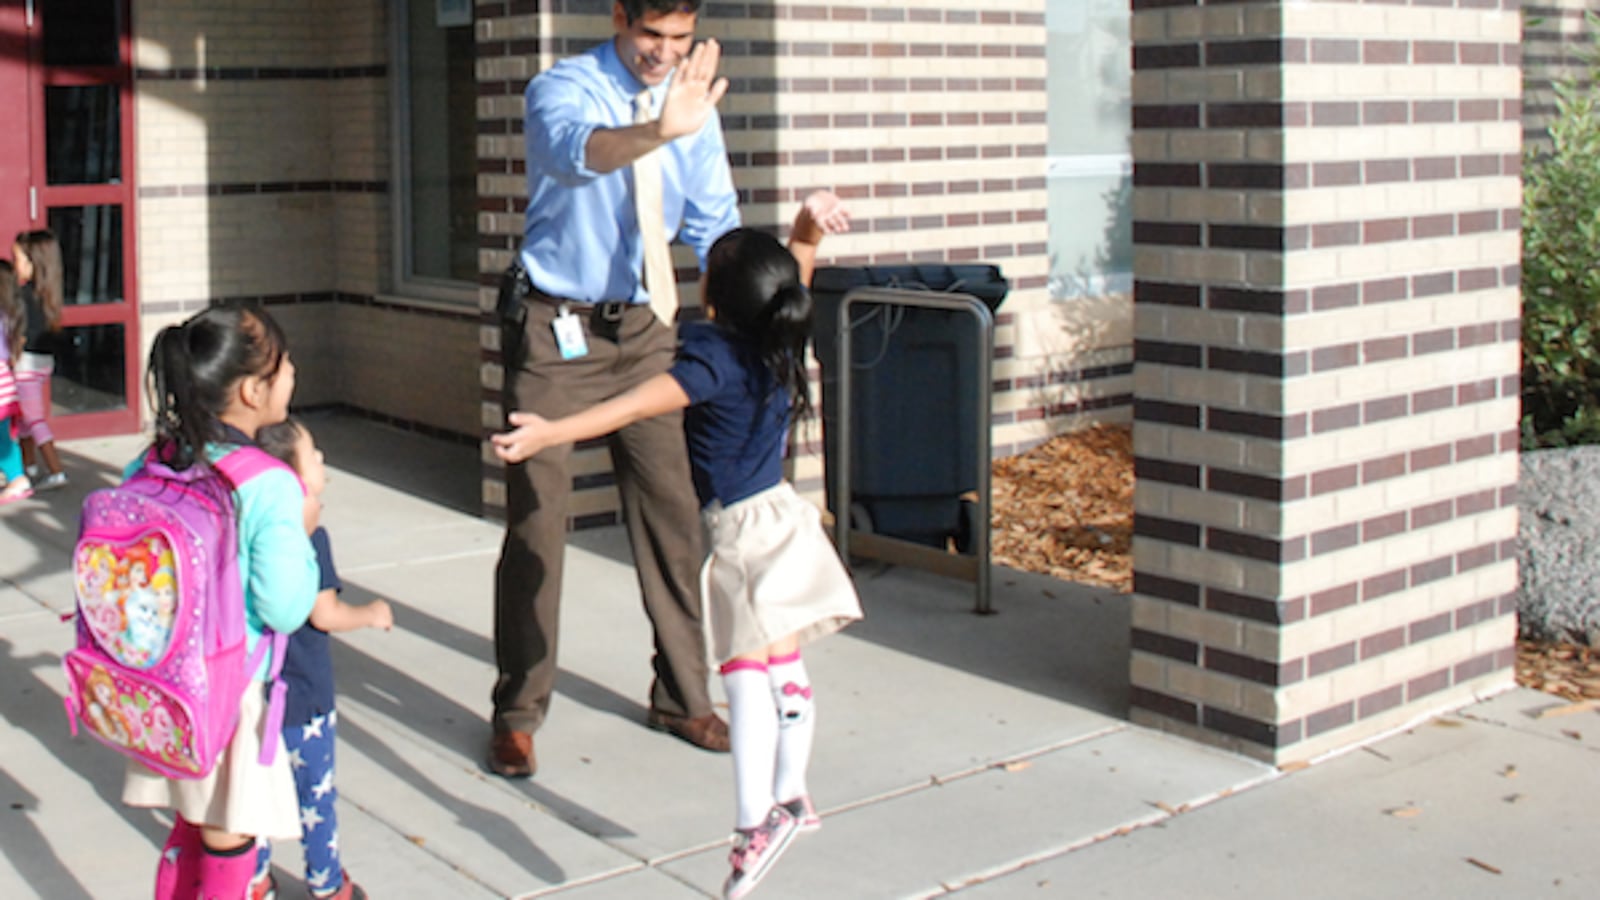 Maxwell Elementary principal Nivan Khosravi greets students as they arrive. Several weeks into the semester, he still had new students arriving.